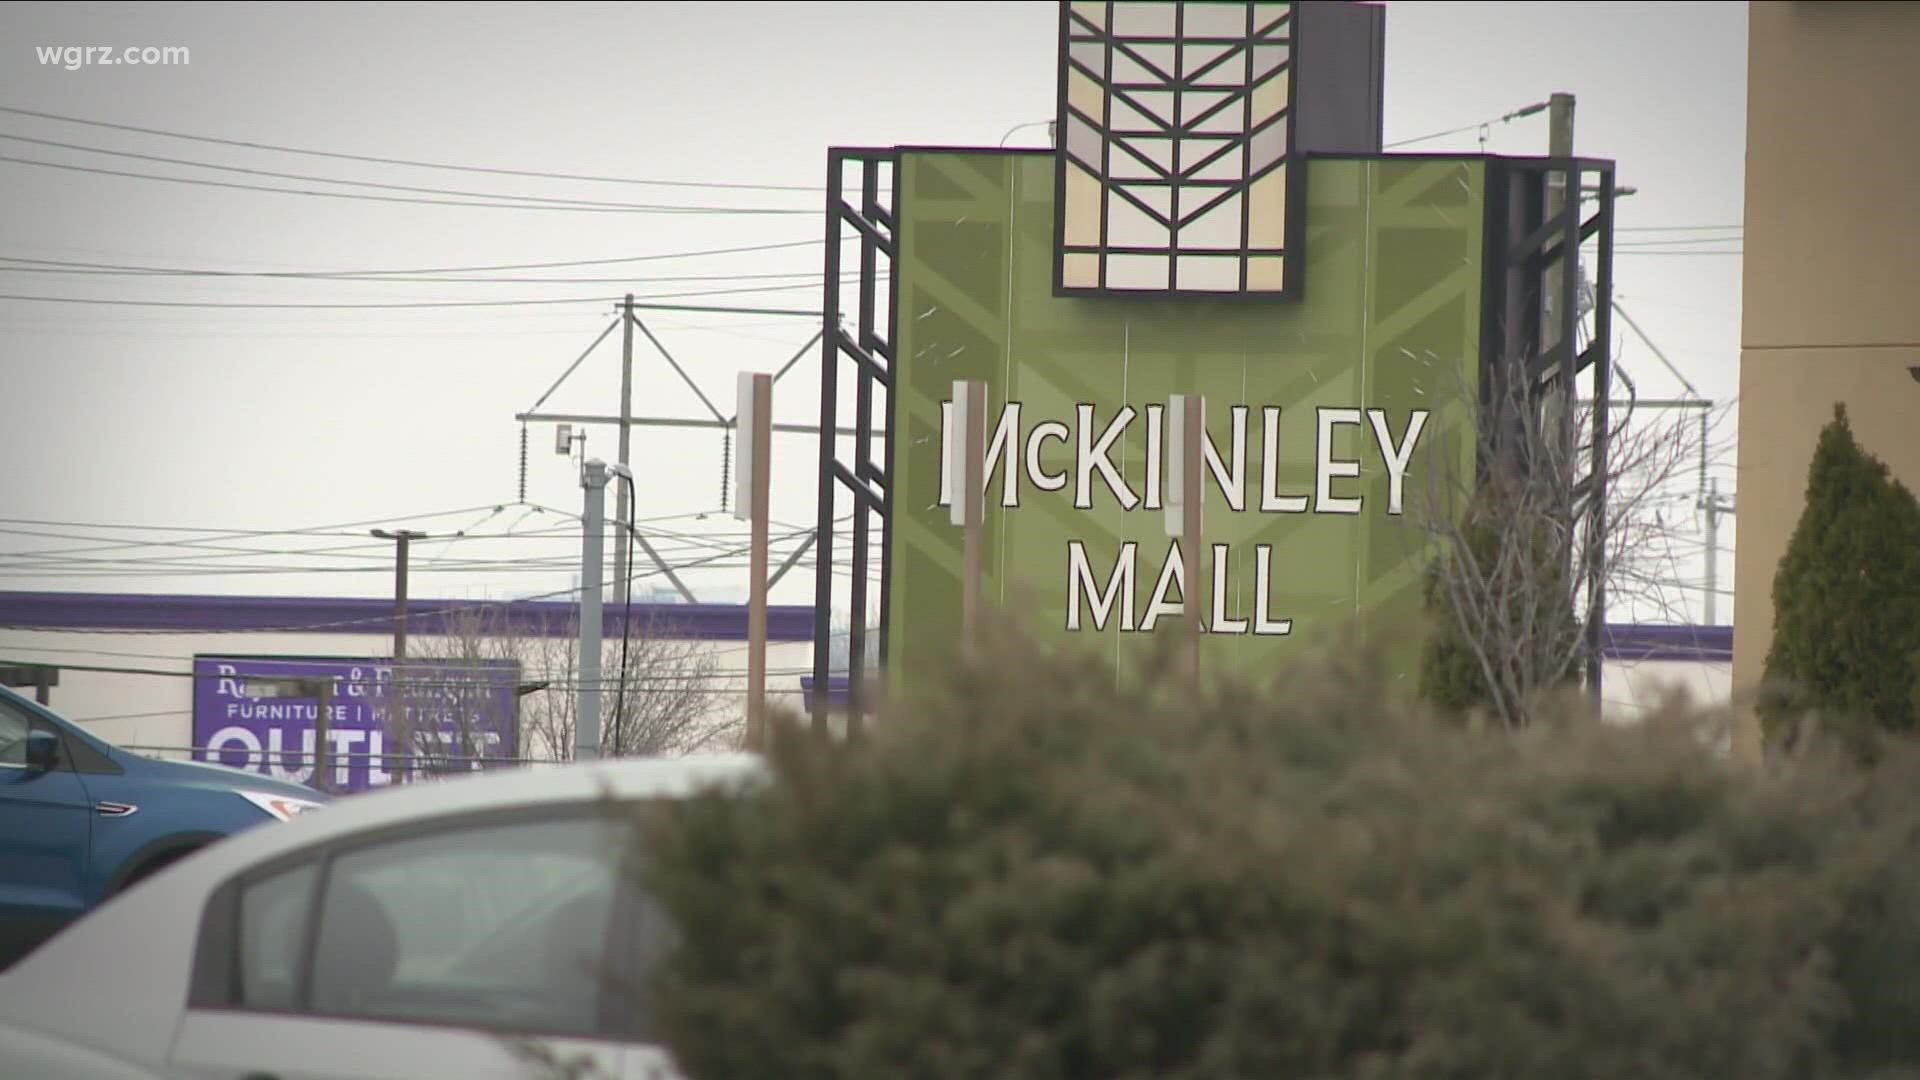 The many ups and downs at McKinley Mall have put the Town of Hamburg in an interesting situation.